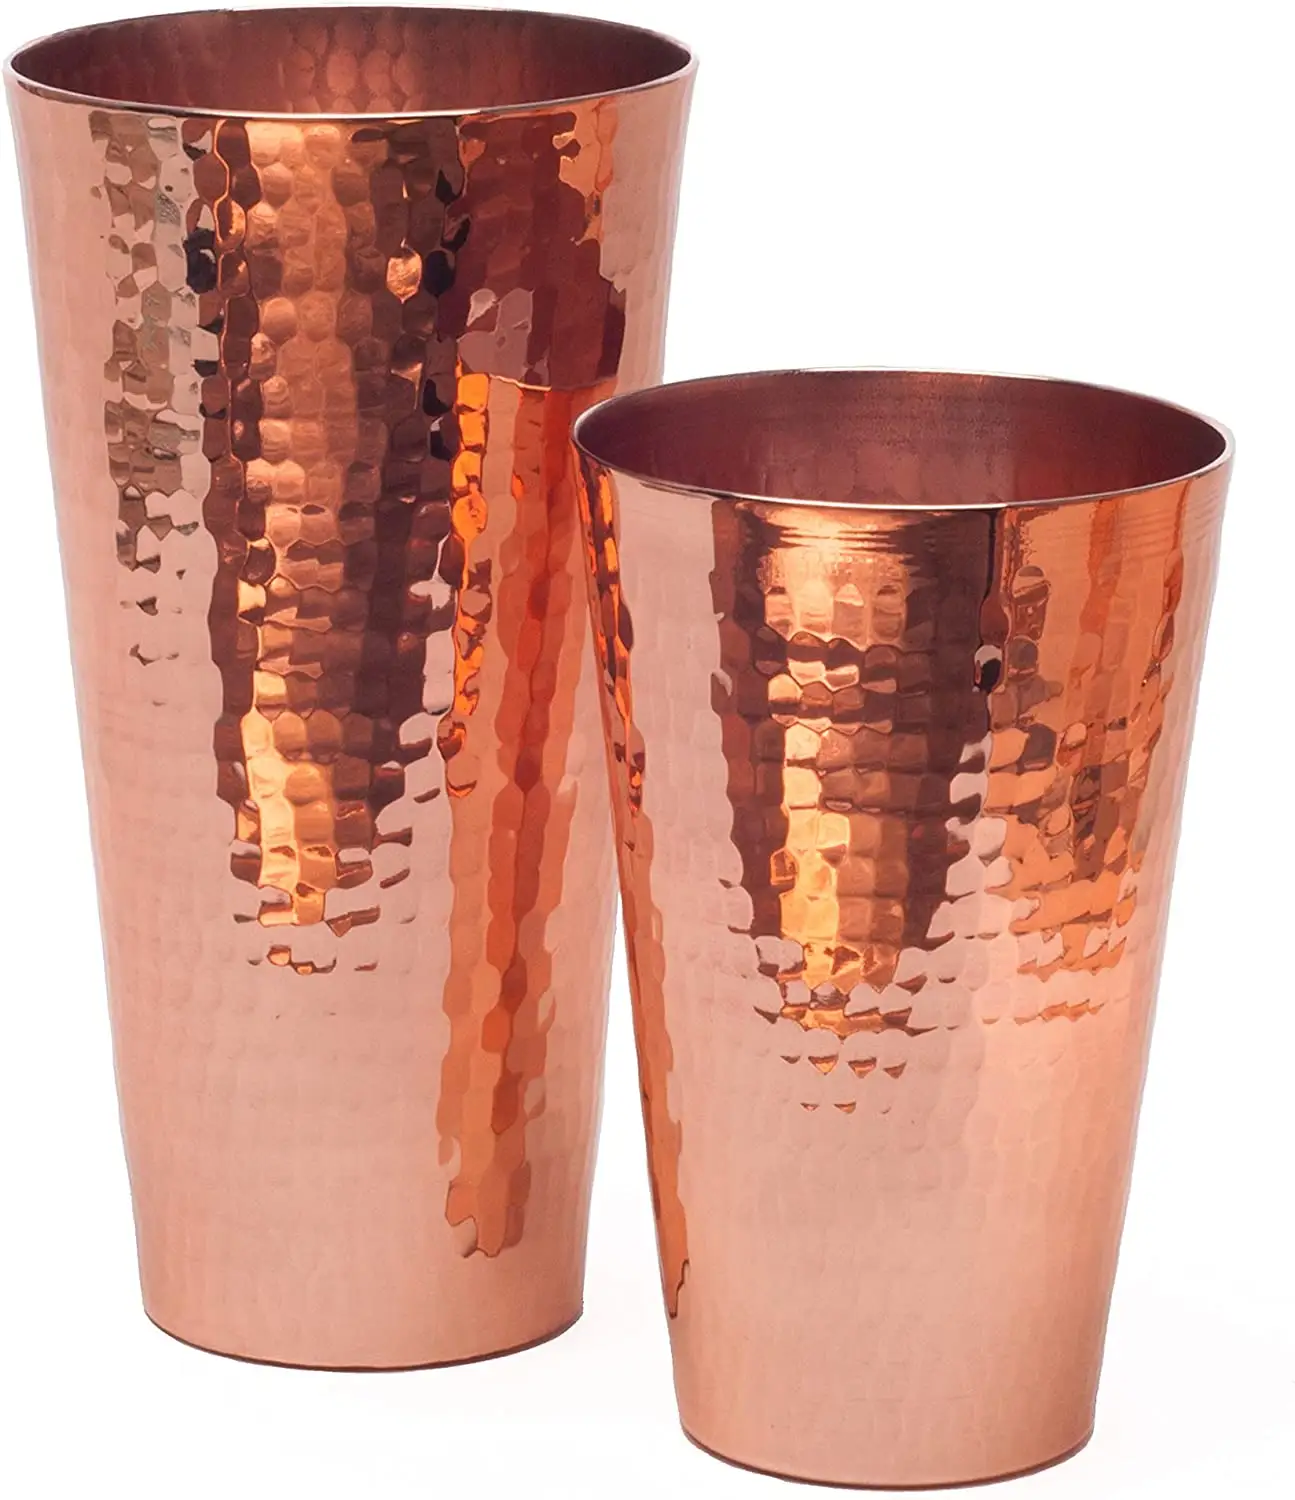 Georgia Moon Girvan Glamis Solid Copper Heavy Gauge Hand Hammered 18 ounce and 30 ounce Copper Cups Copper Boston Shaker Set